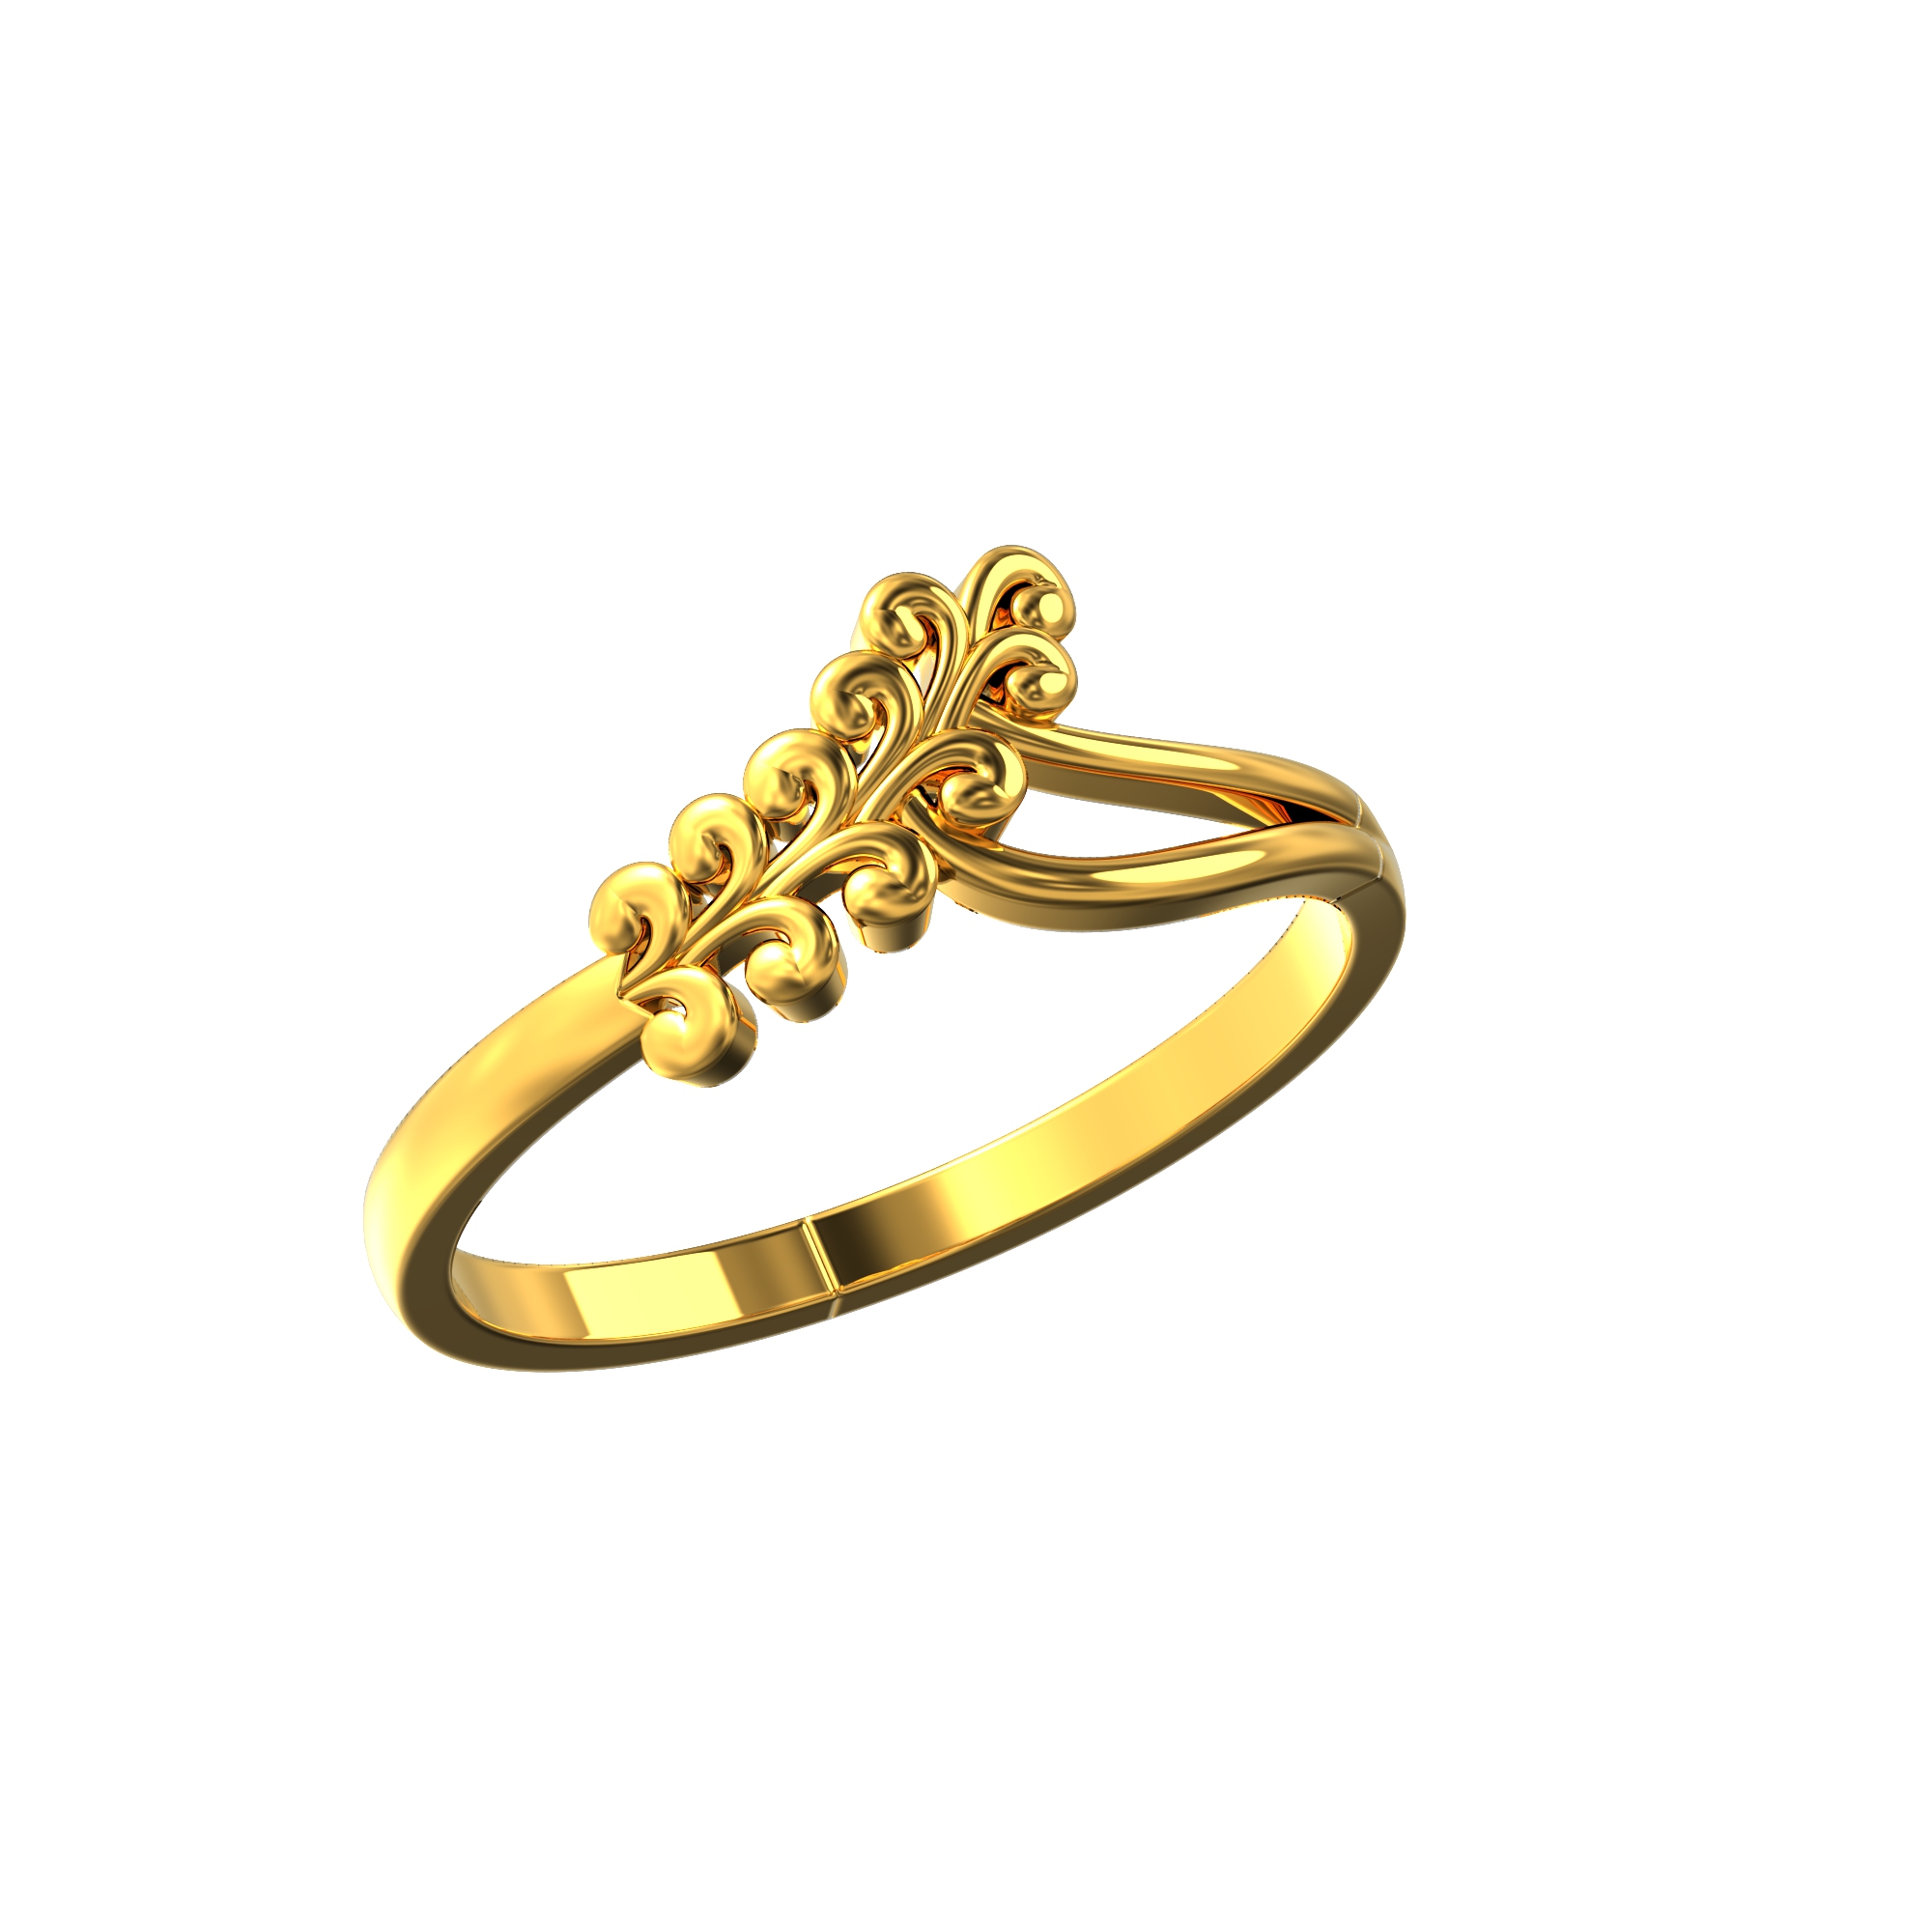 Buy Attractive Chidambaram Covering Marriage Bridal Gold Ring Design Plain  Big Size Ring for Ladies